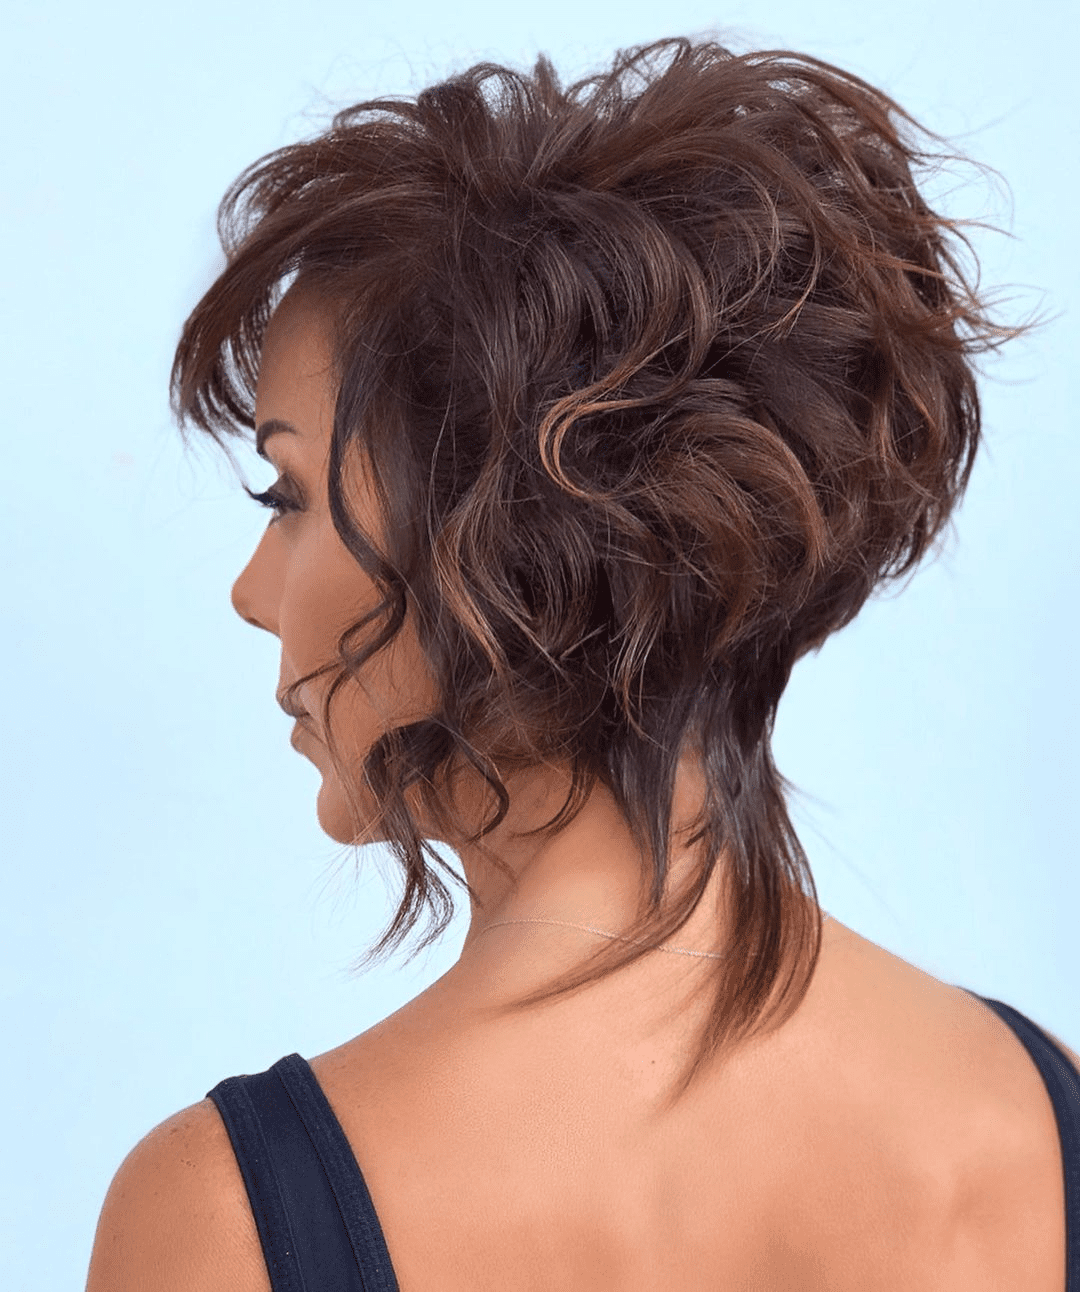 The Textured Tousled Bob for a Trendsetter